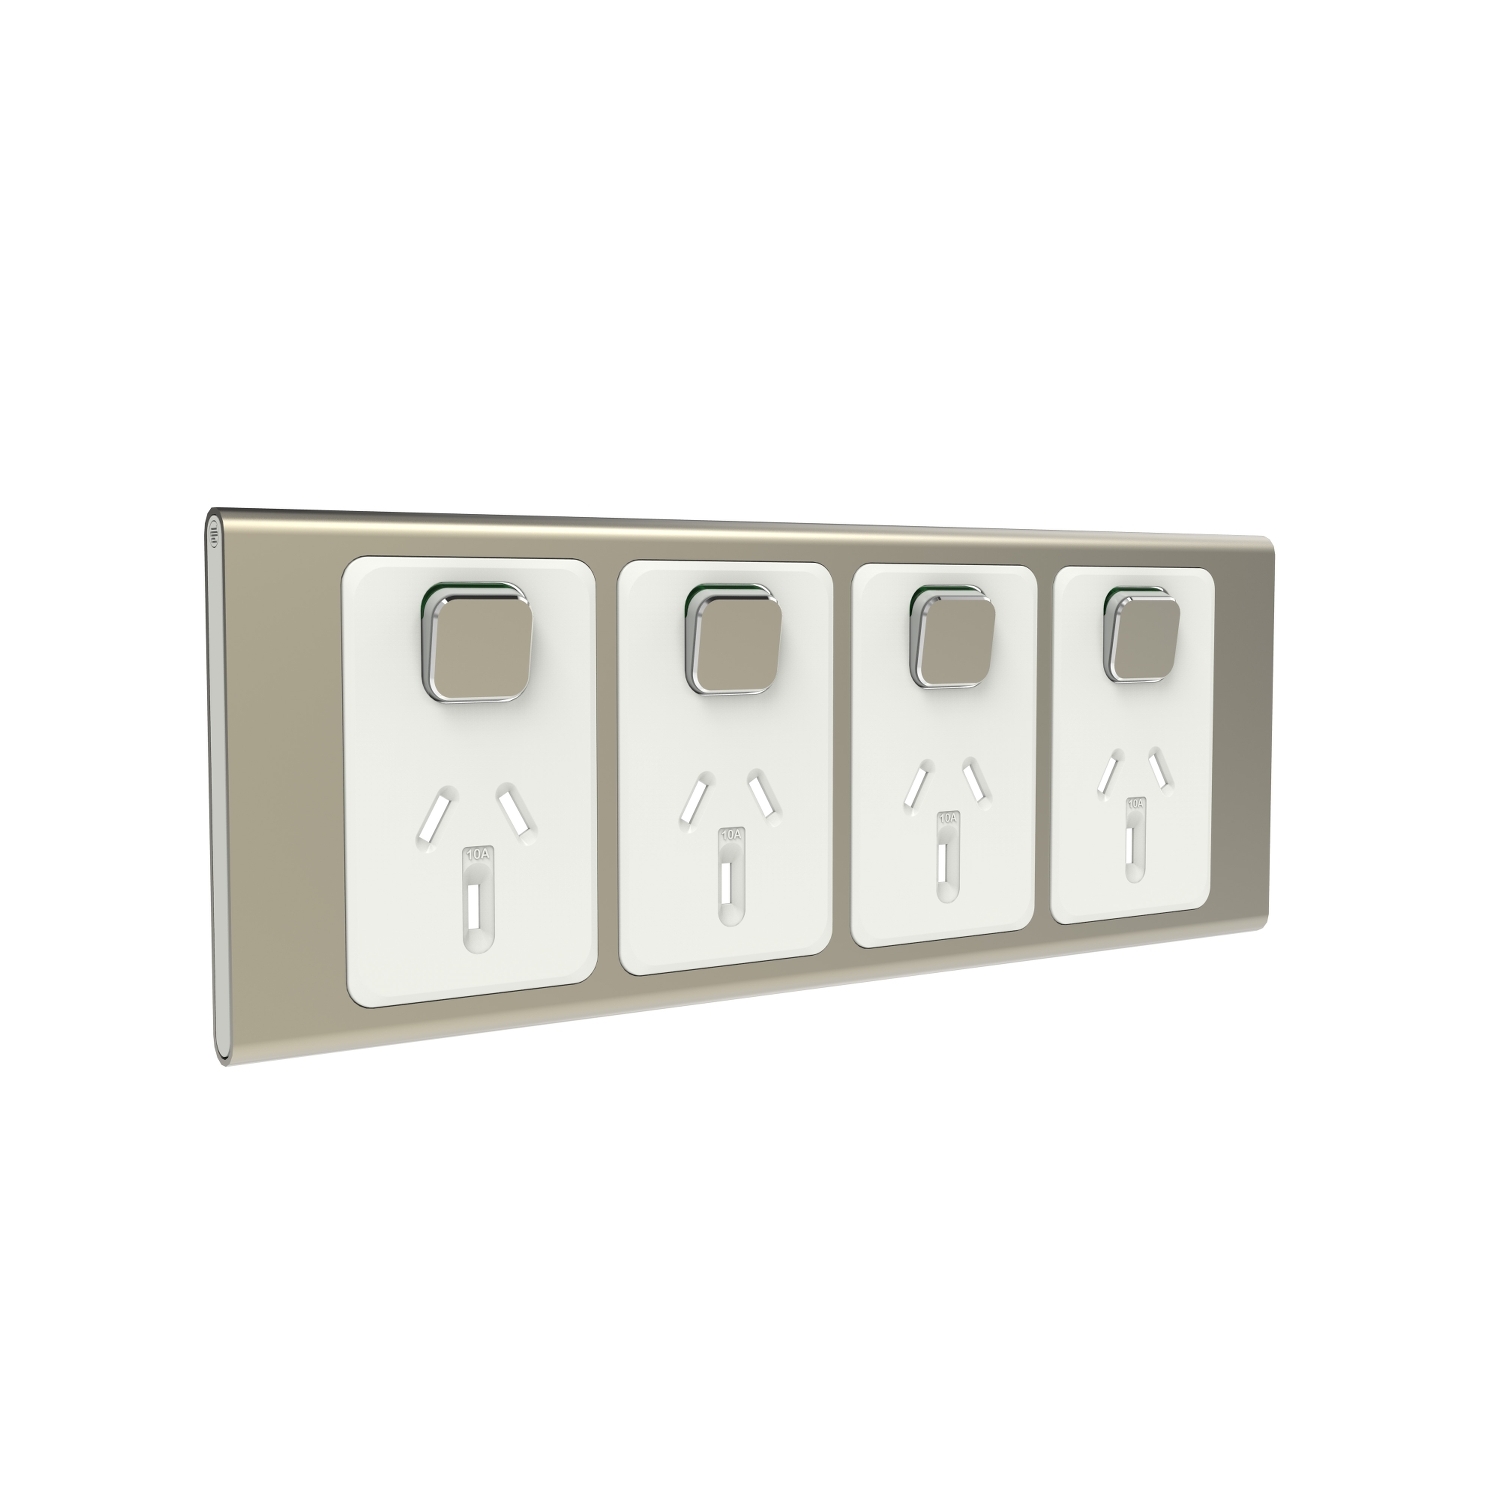 PDL Iconic Styl, cover frame, 4 switches & 4 sockets, horizontal - Crowne